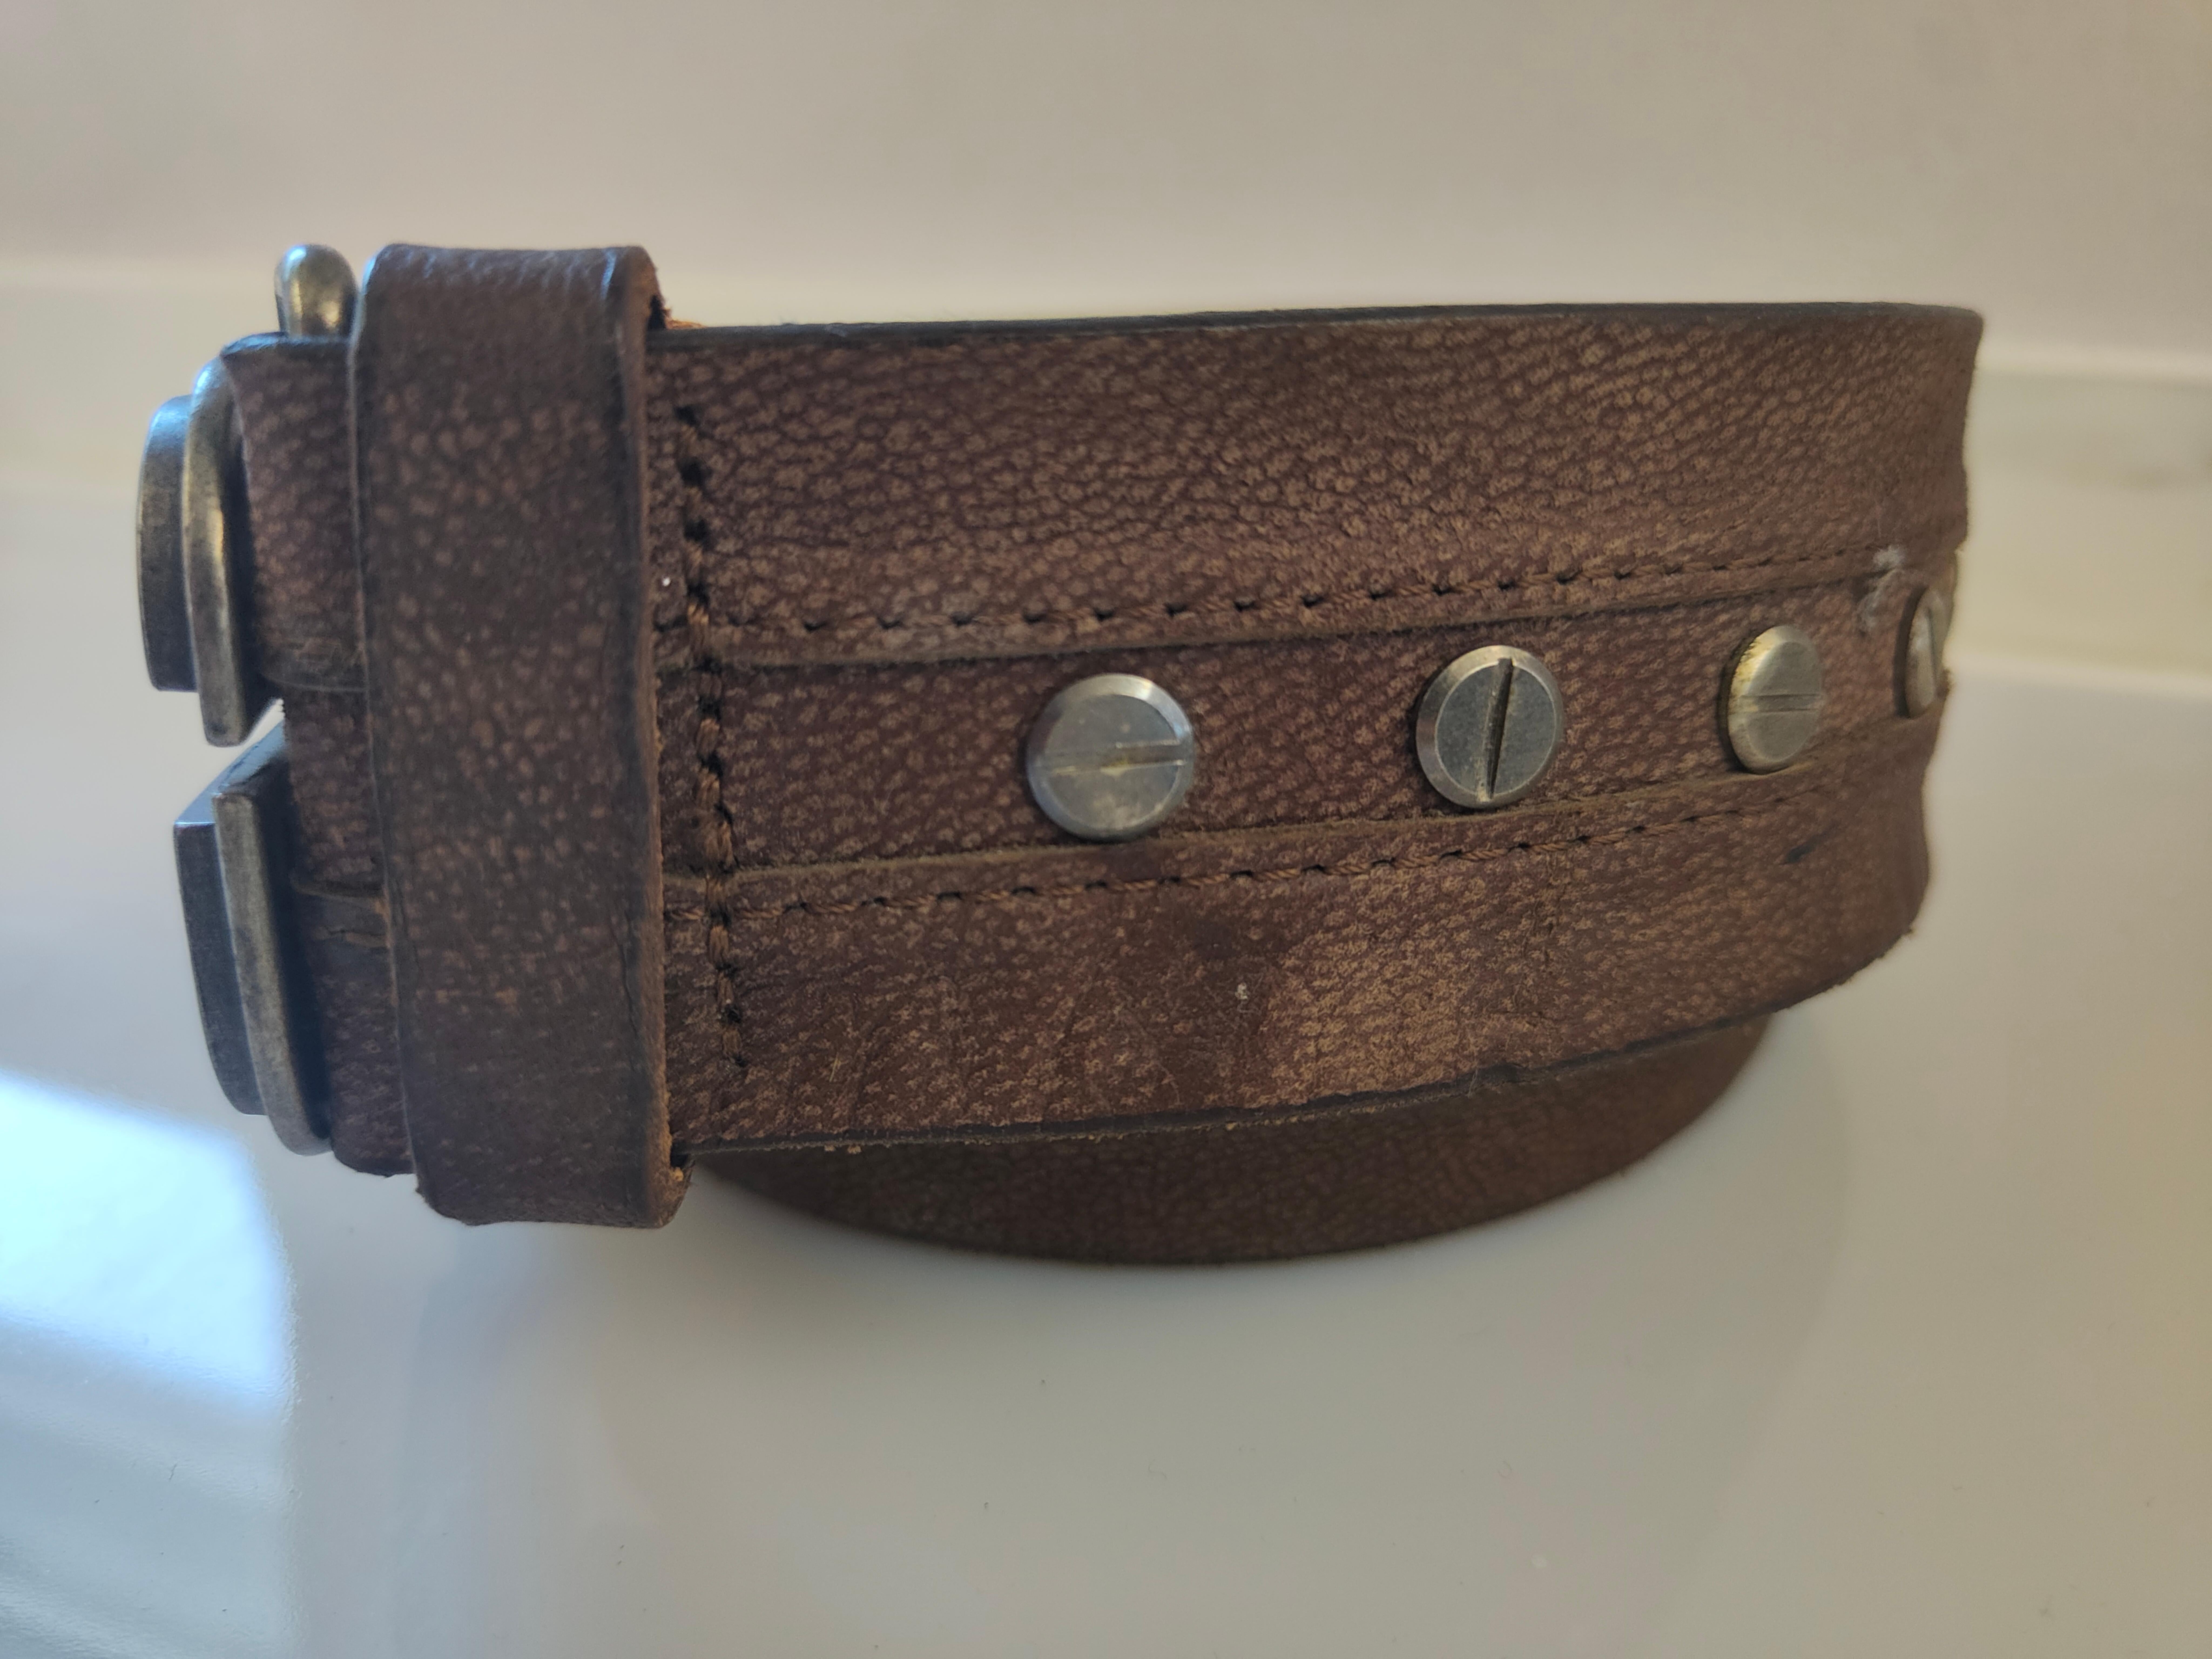 Dolce & Gabbana D&G Brown belt with studs
totally made in Italy